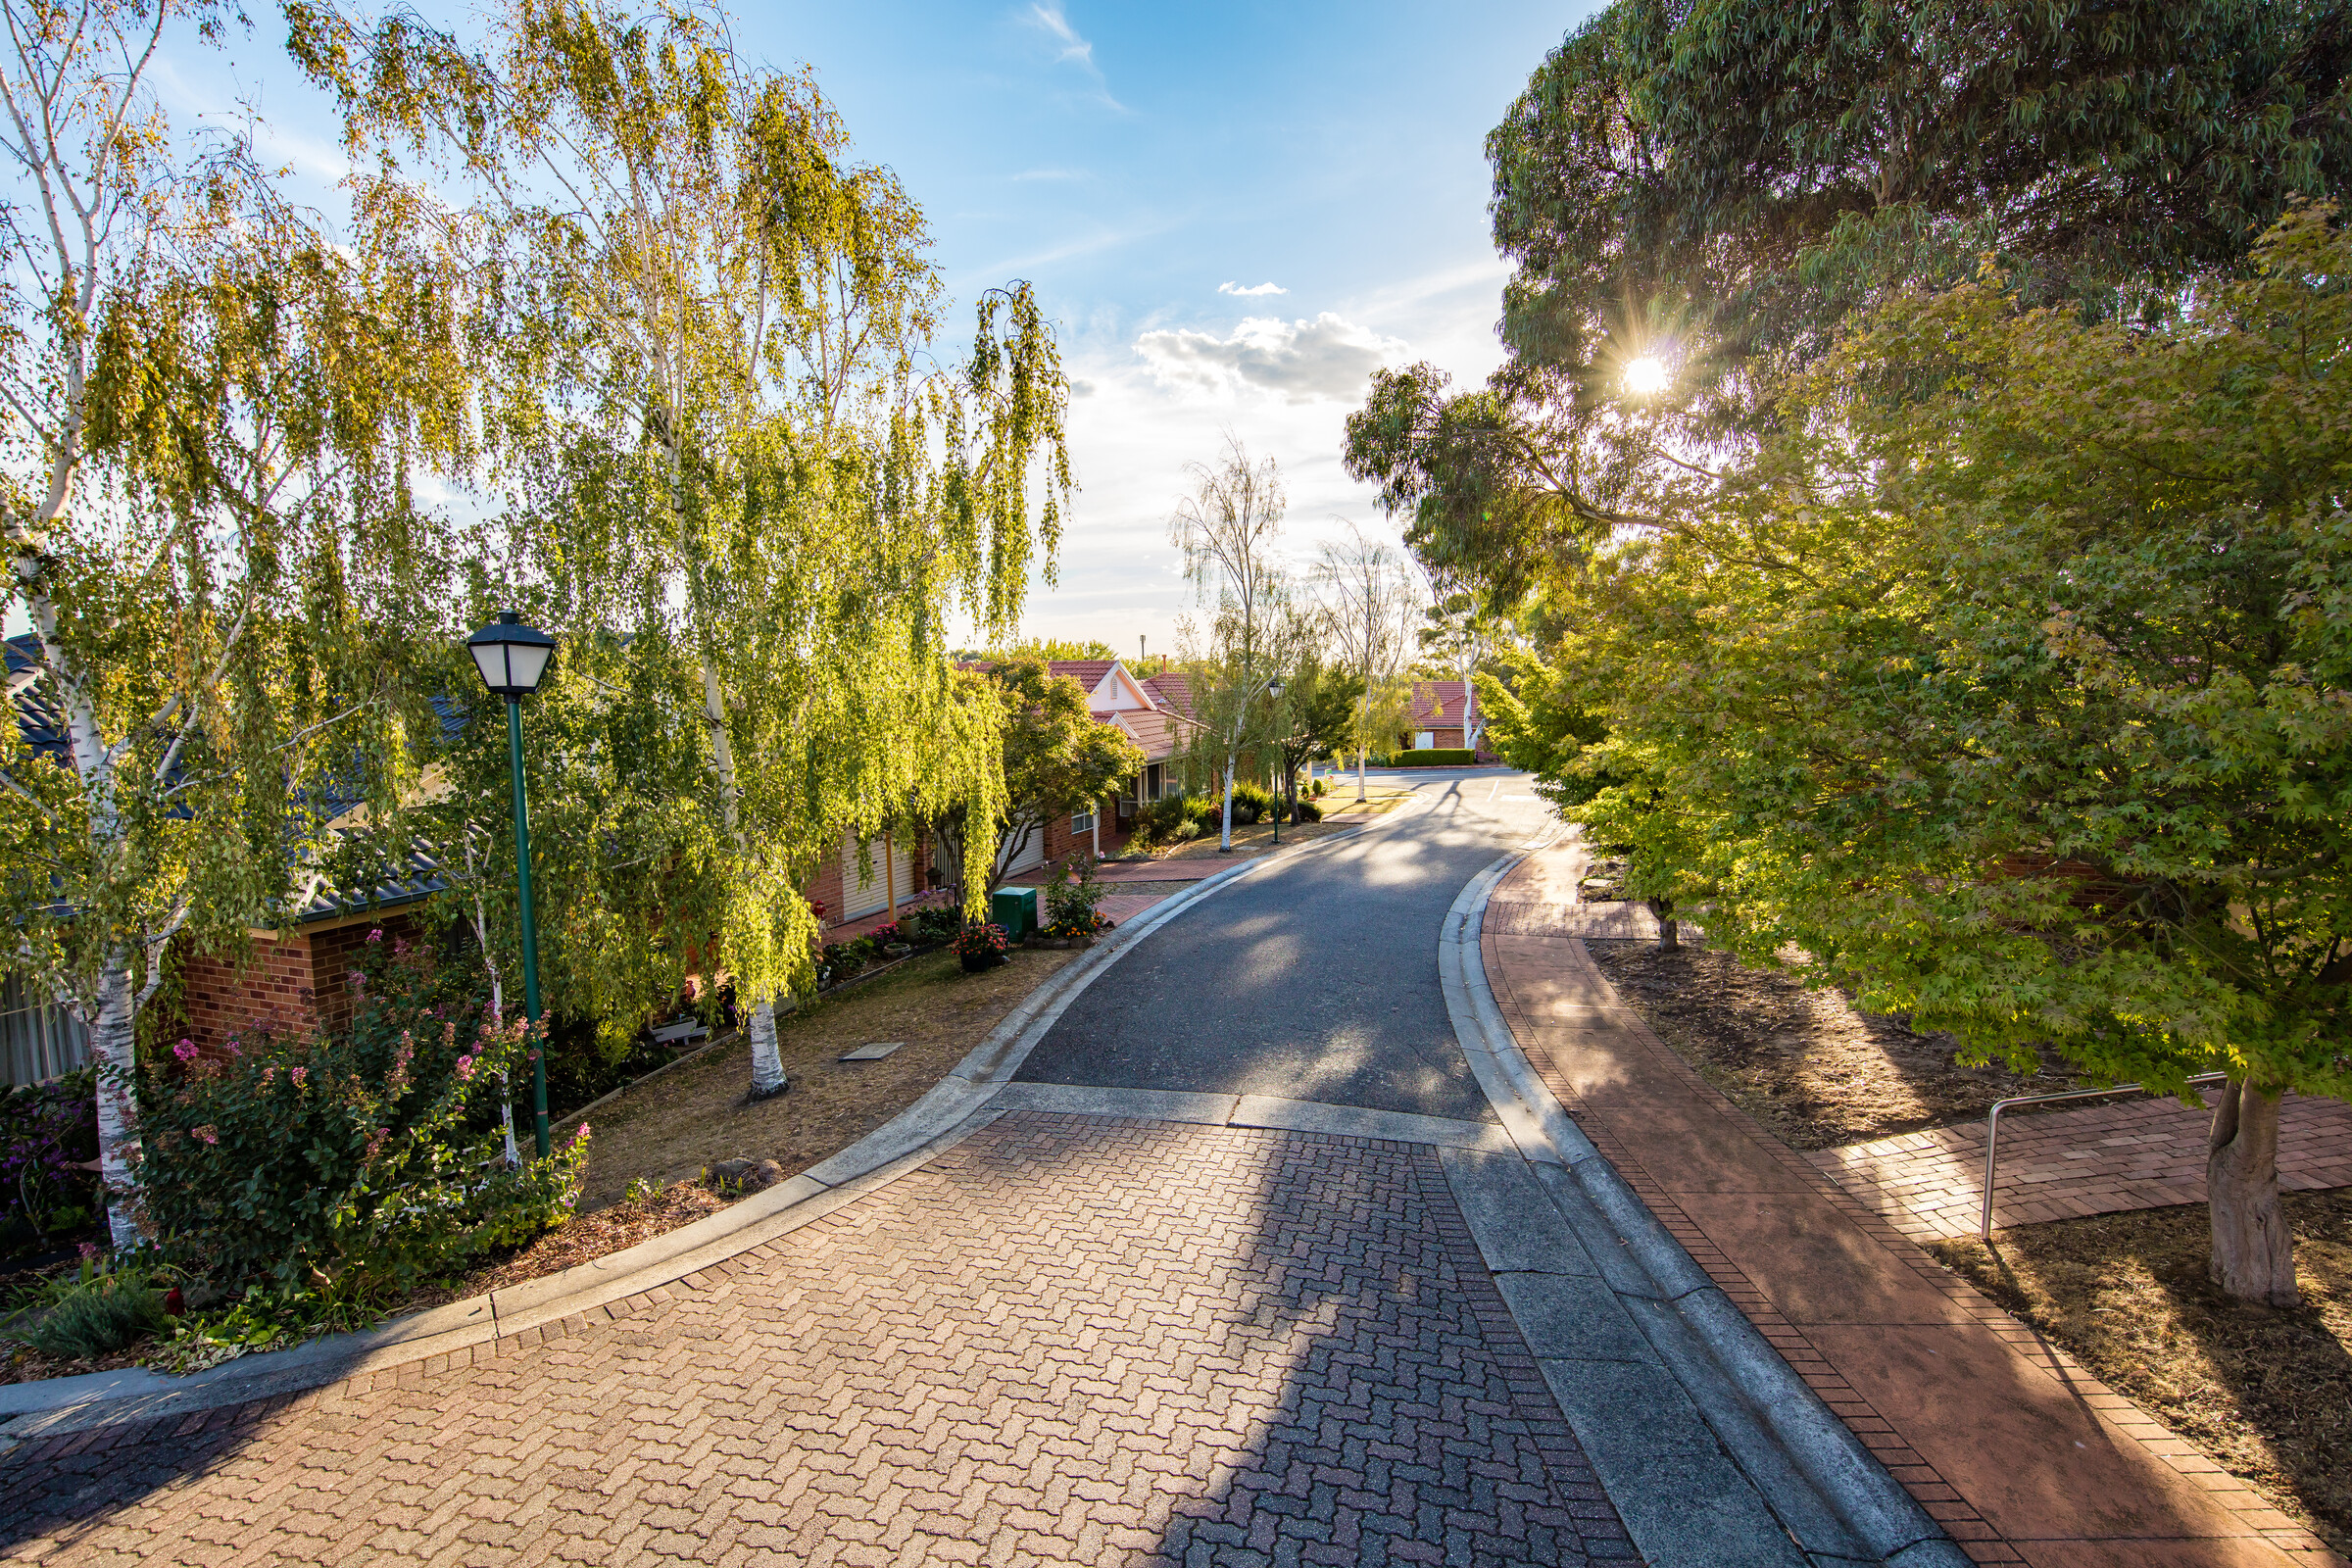 Fiddlers Green road lined by houses, gardens and trees